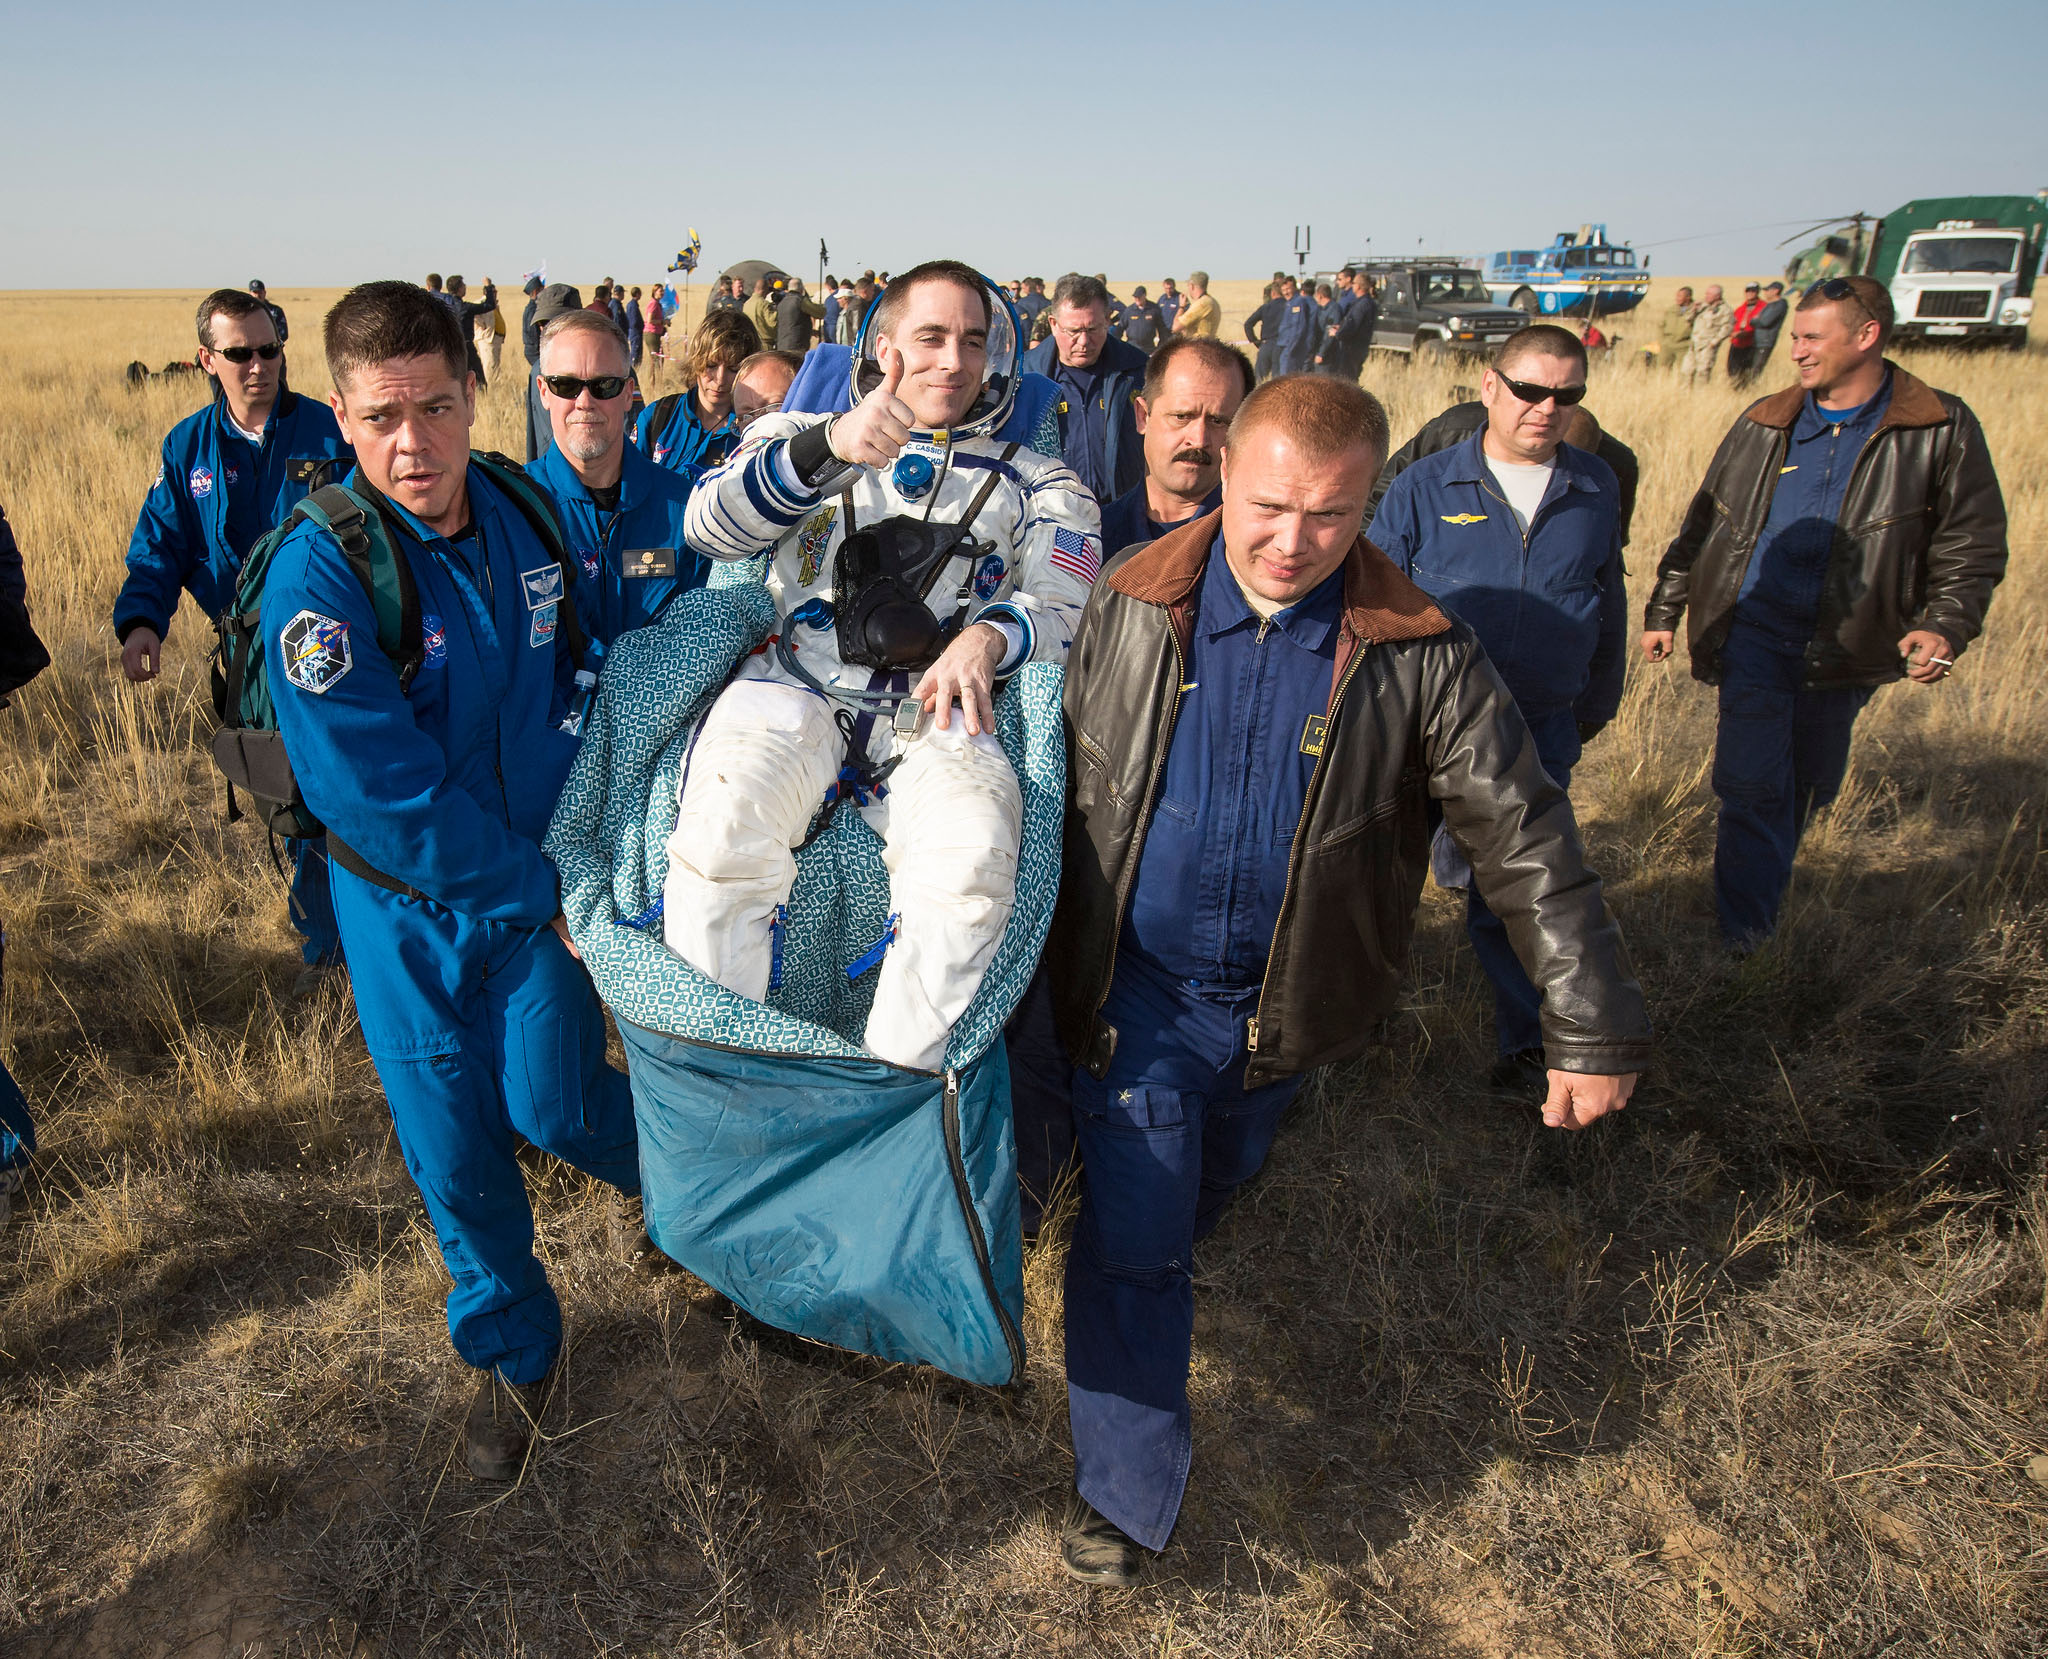 Helped by support personnel, including Chief Astronaut Bob Benken (left), Soyuz TMA-08M crewman Chris Cassidy gives a thumbs-up after his return from a 166-day space mission. Photo Credit: NASA